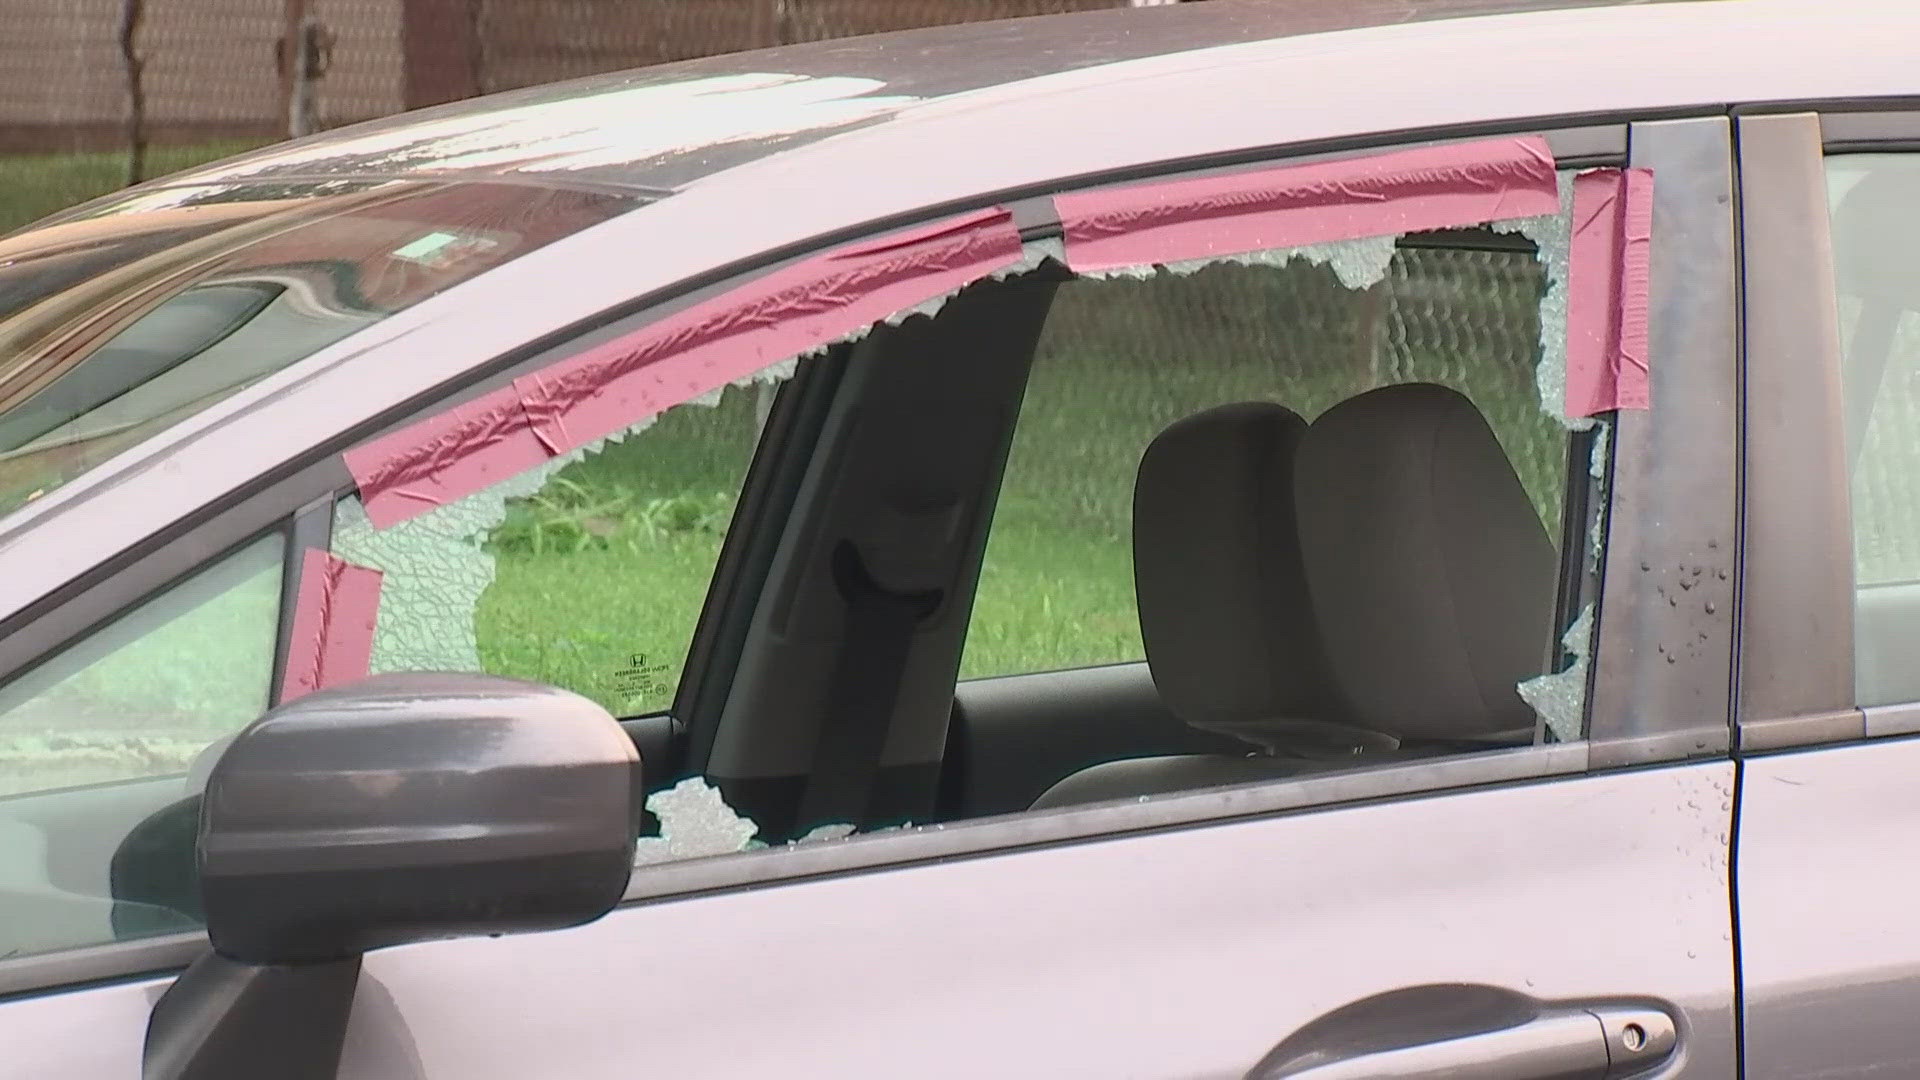 More than 40 cars were vandalized between 8 p.m. Sunday and 6 a.m. on Monday.